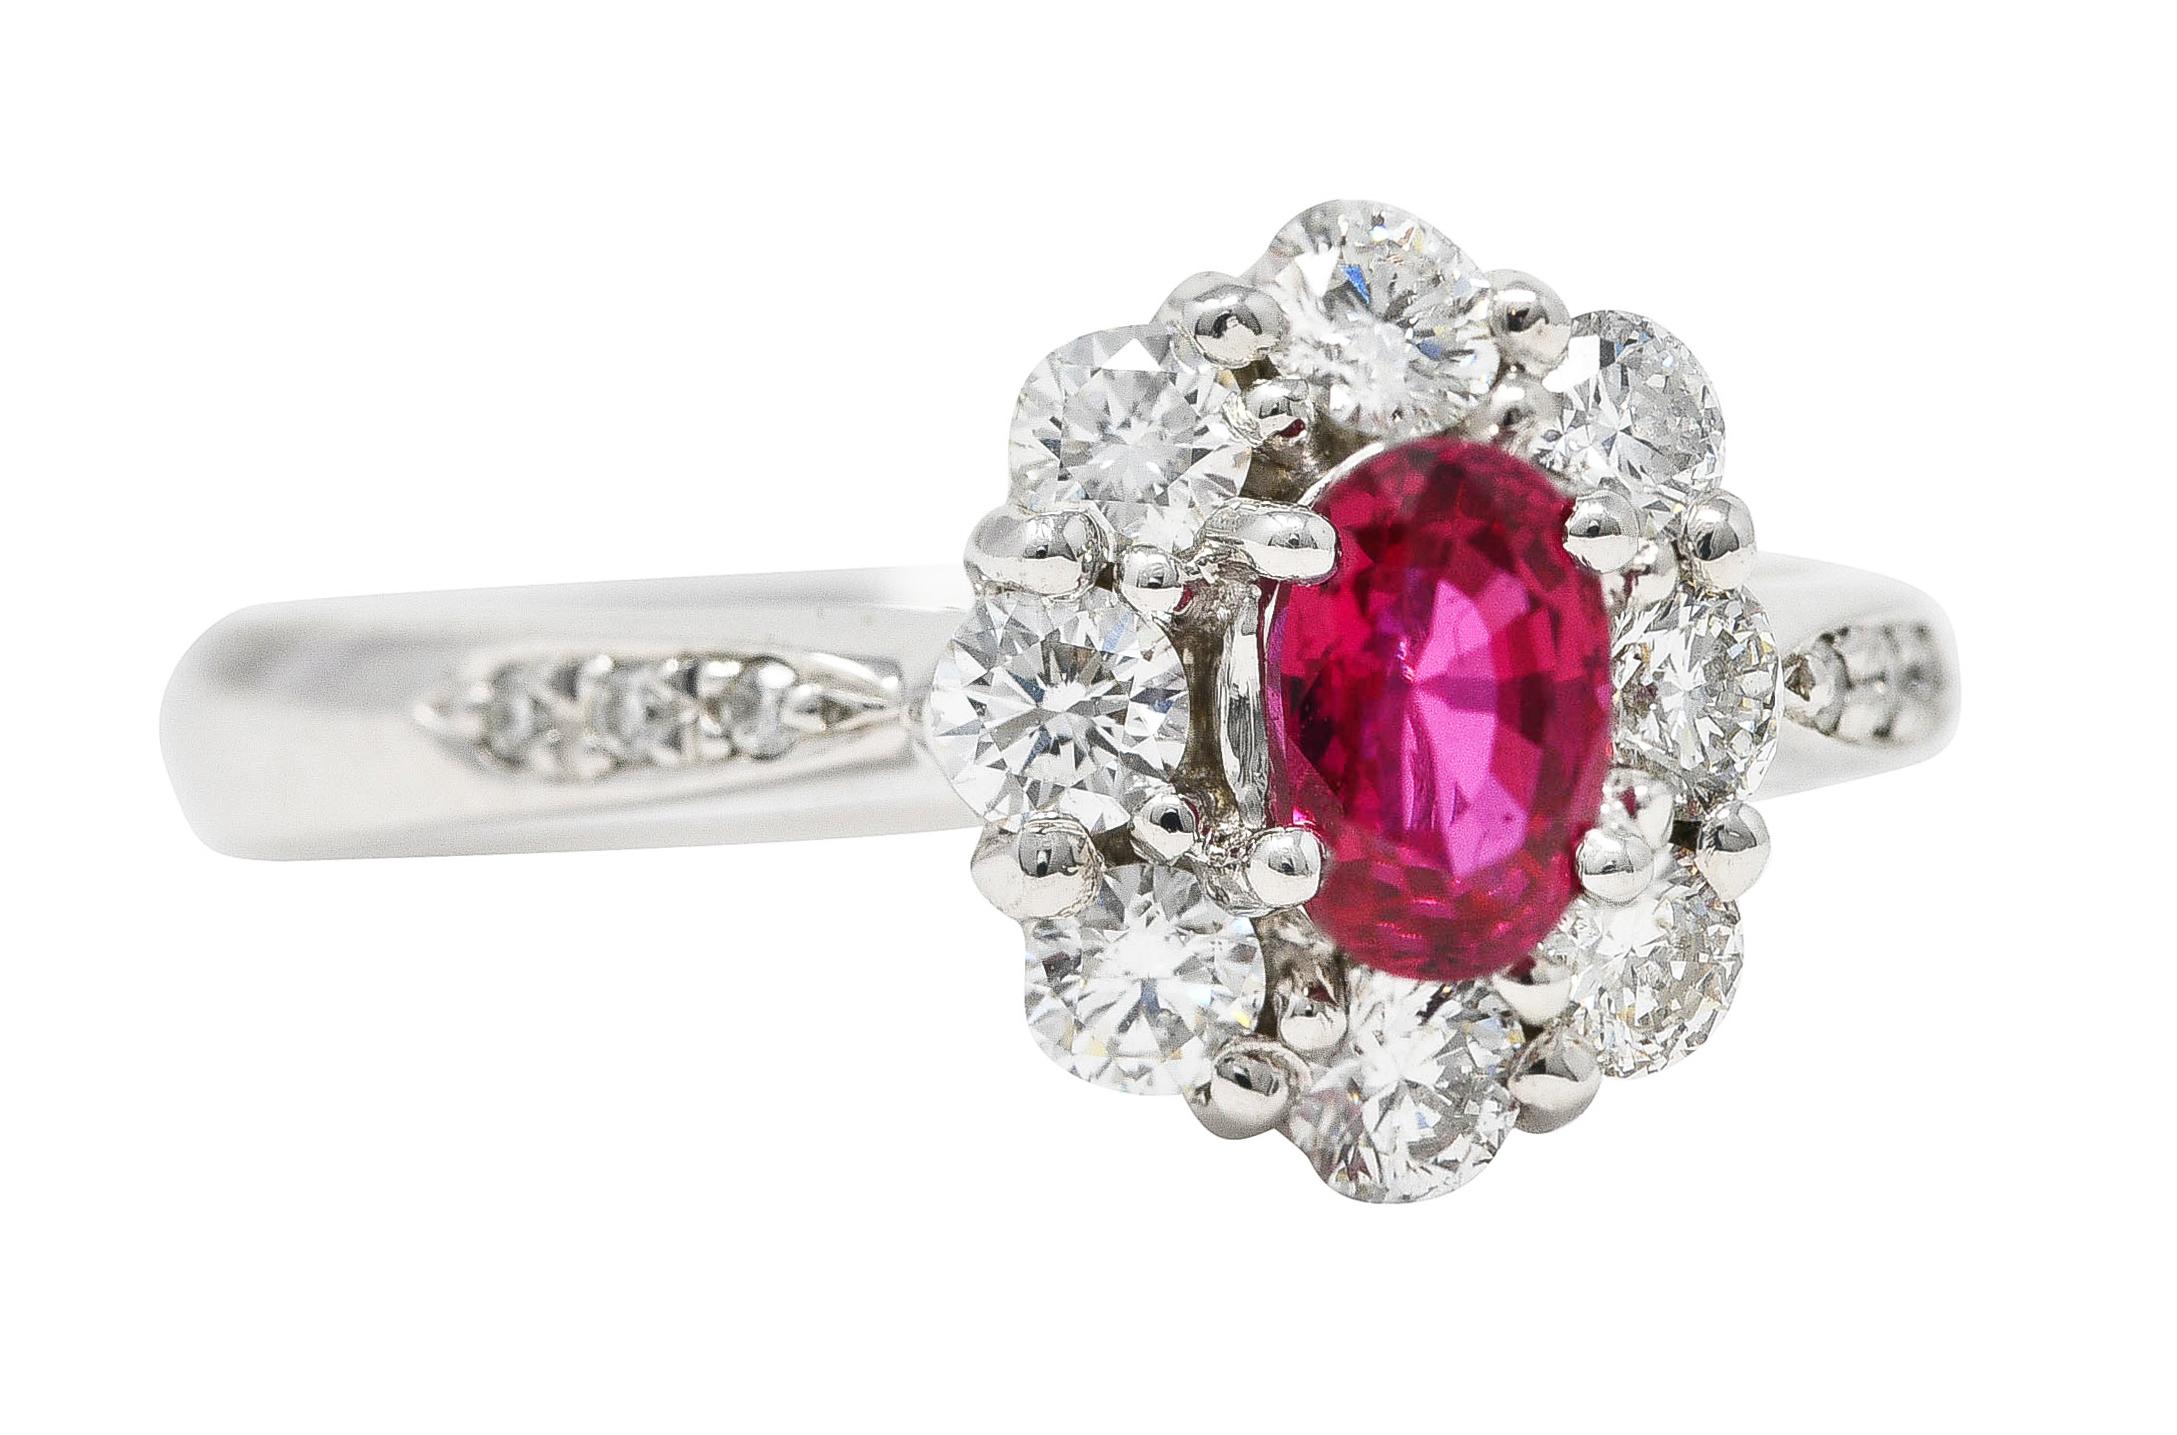 Centering an oval cut ruby weighing 0.60 carat total - transparent slightly purplish-red. Prong set with a halo surround of round brilliant cut diamonds. With additional diamonds bead set in shoulders. Weighing 0.64 carat total. Completed by tapered